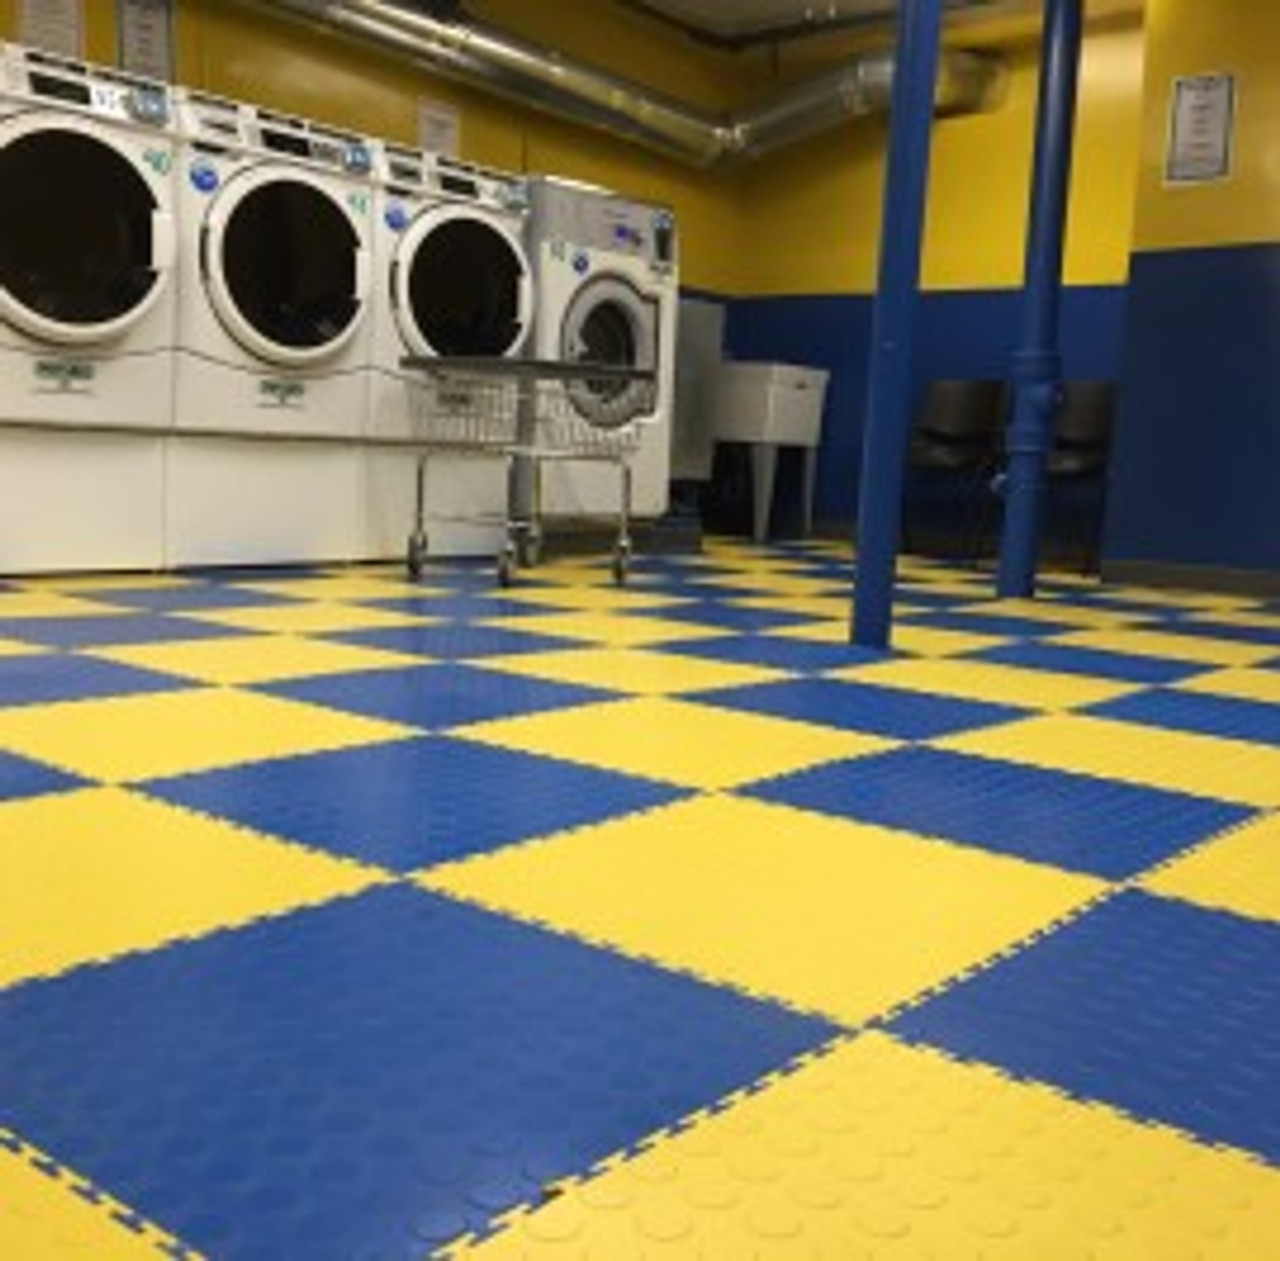 Flexi-Tile Coin by Perfection Floor Blue and Yellow used in a Laundry mat